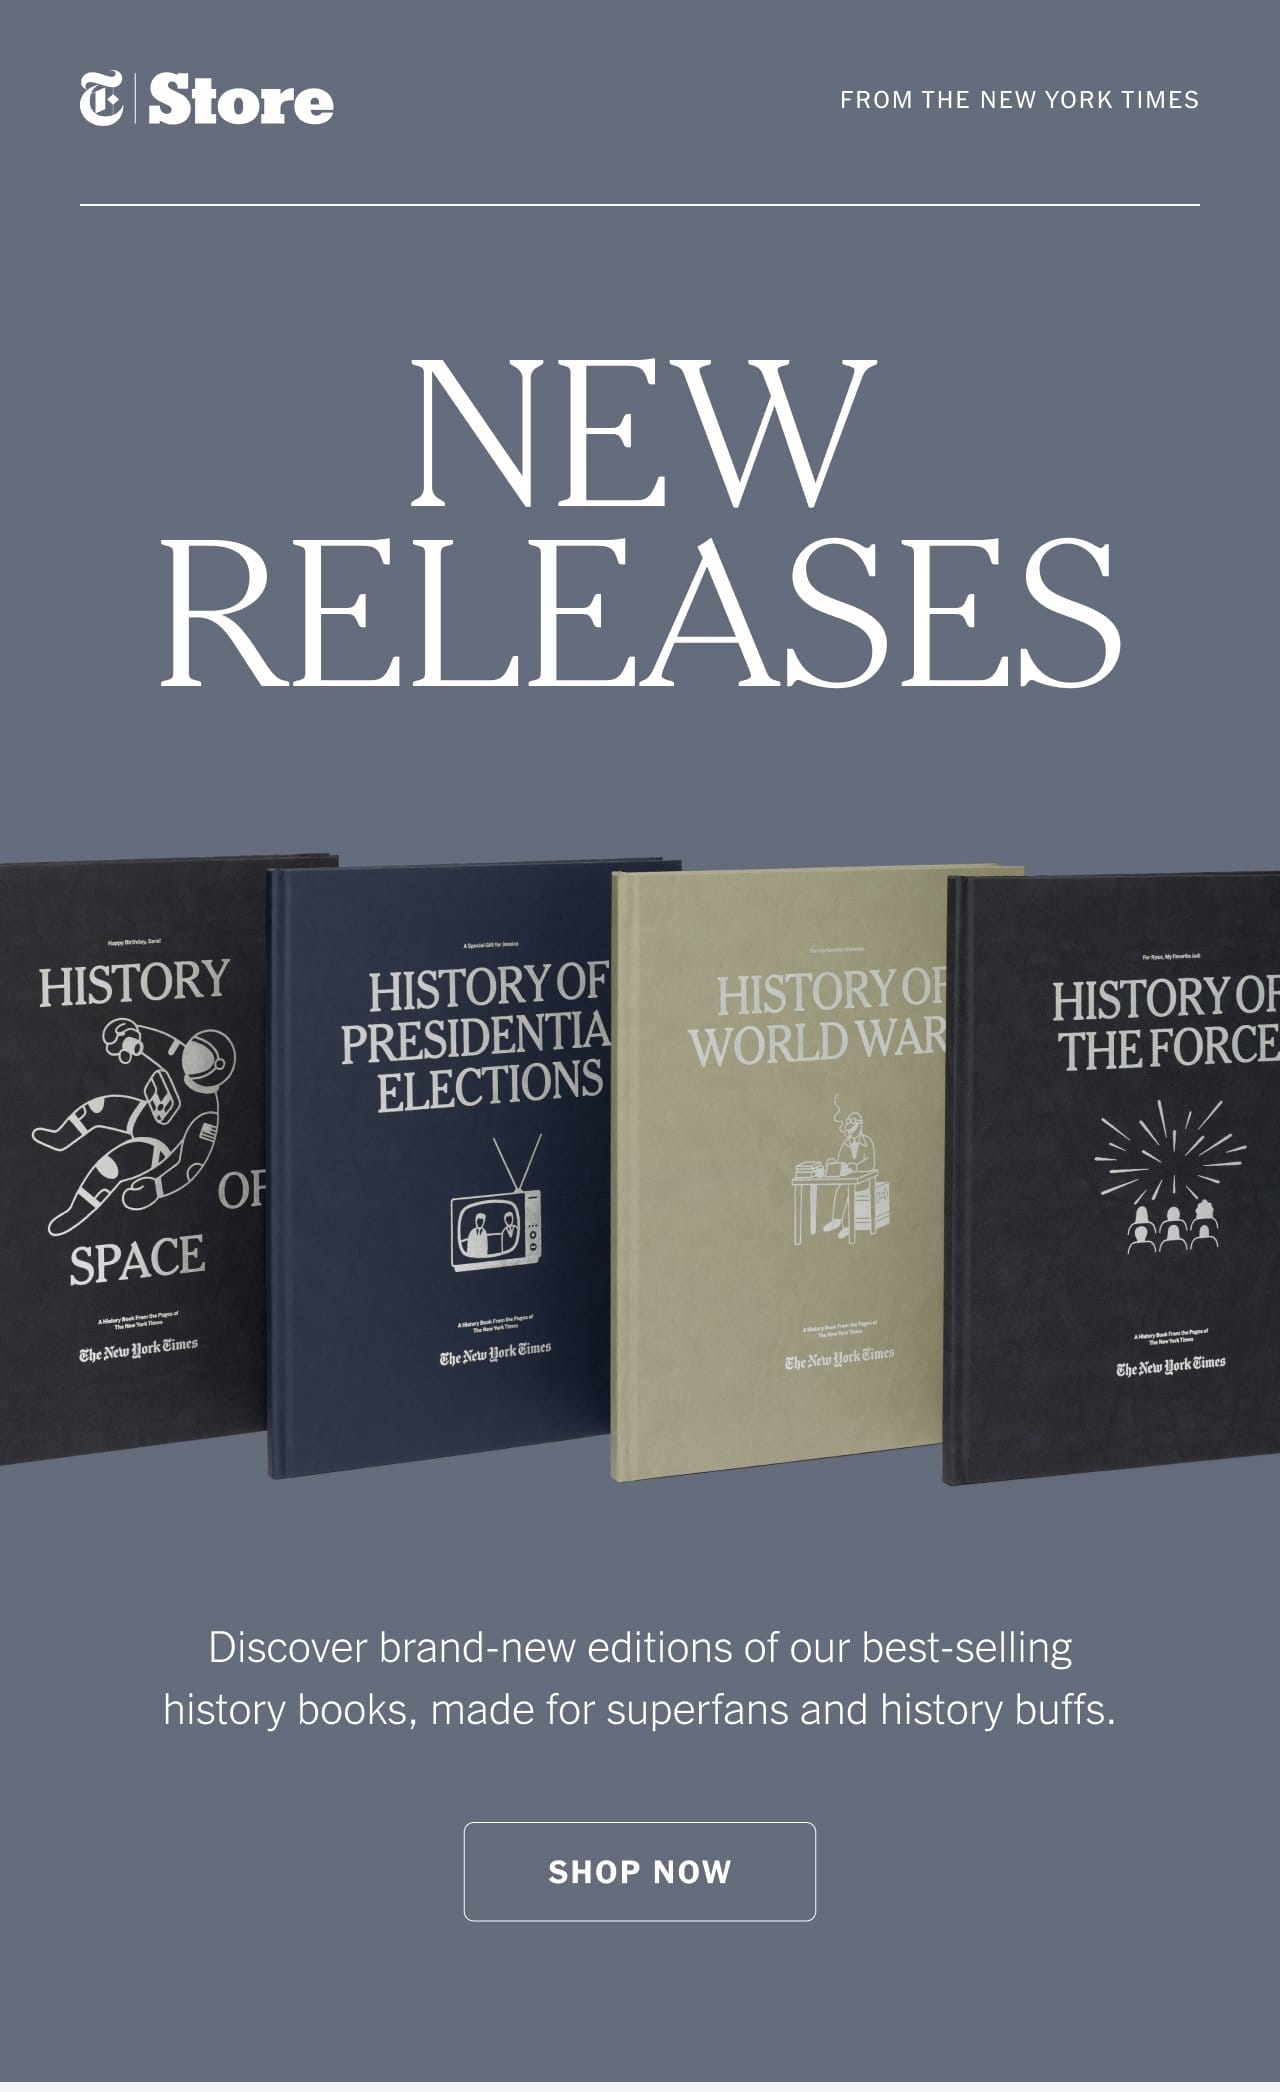 New Releases. Discover brand-new editions of our best-selling history books, made for superfans and history buffs. Shop Now.